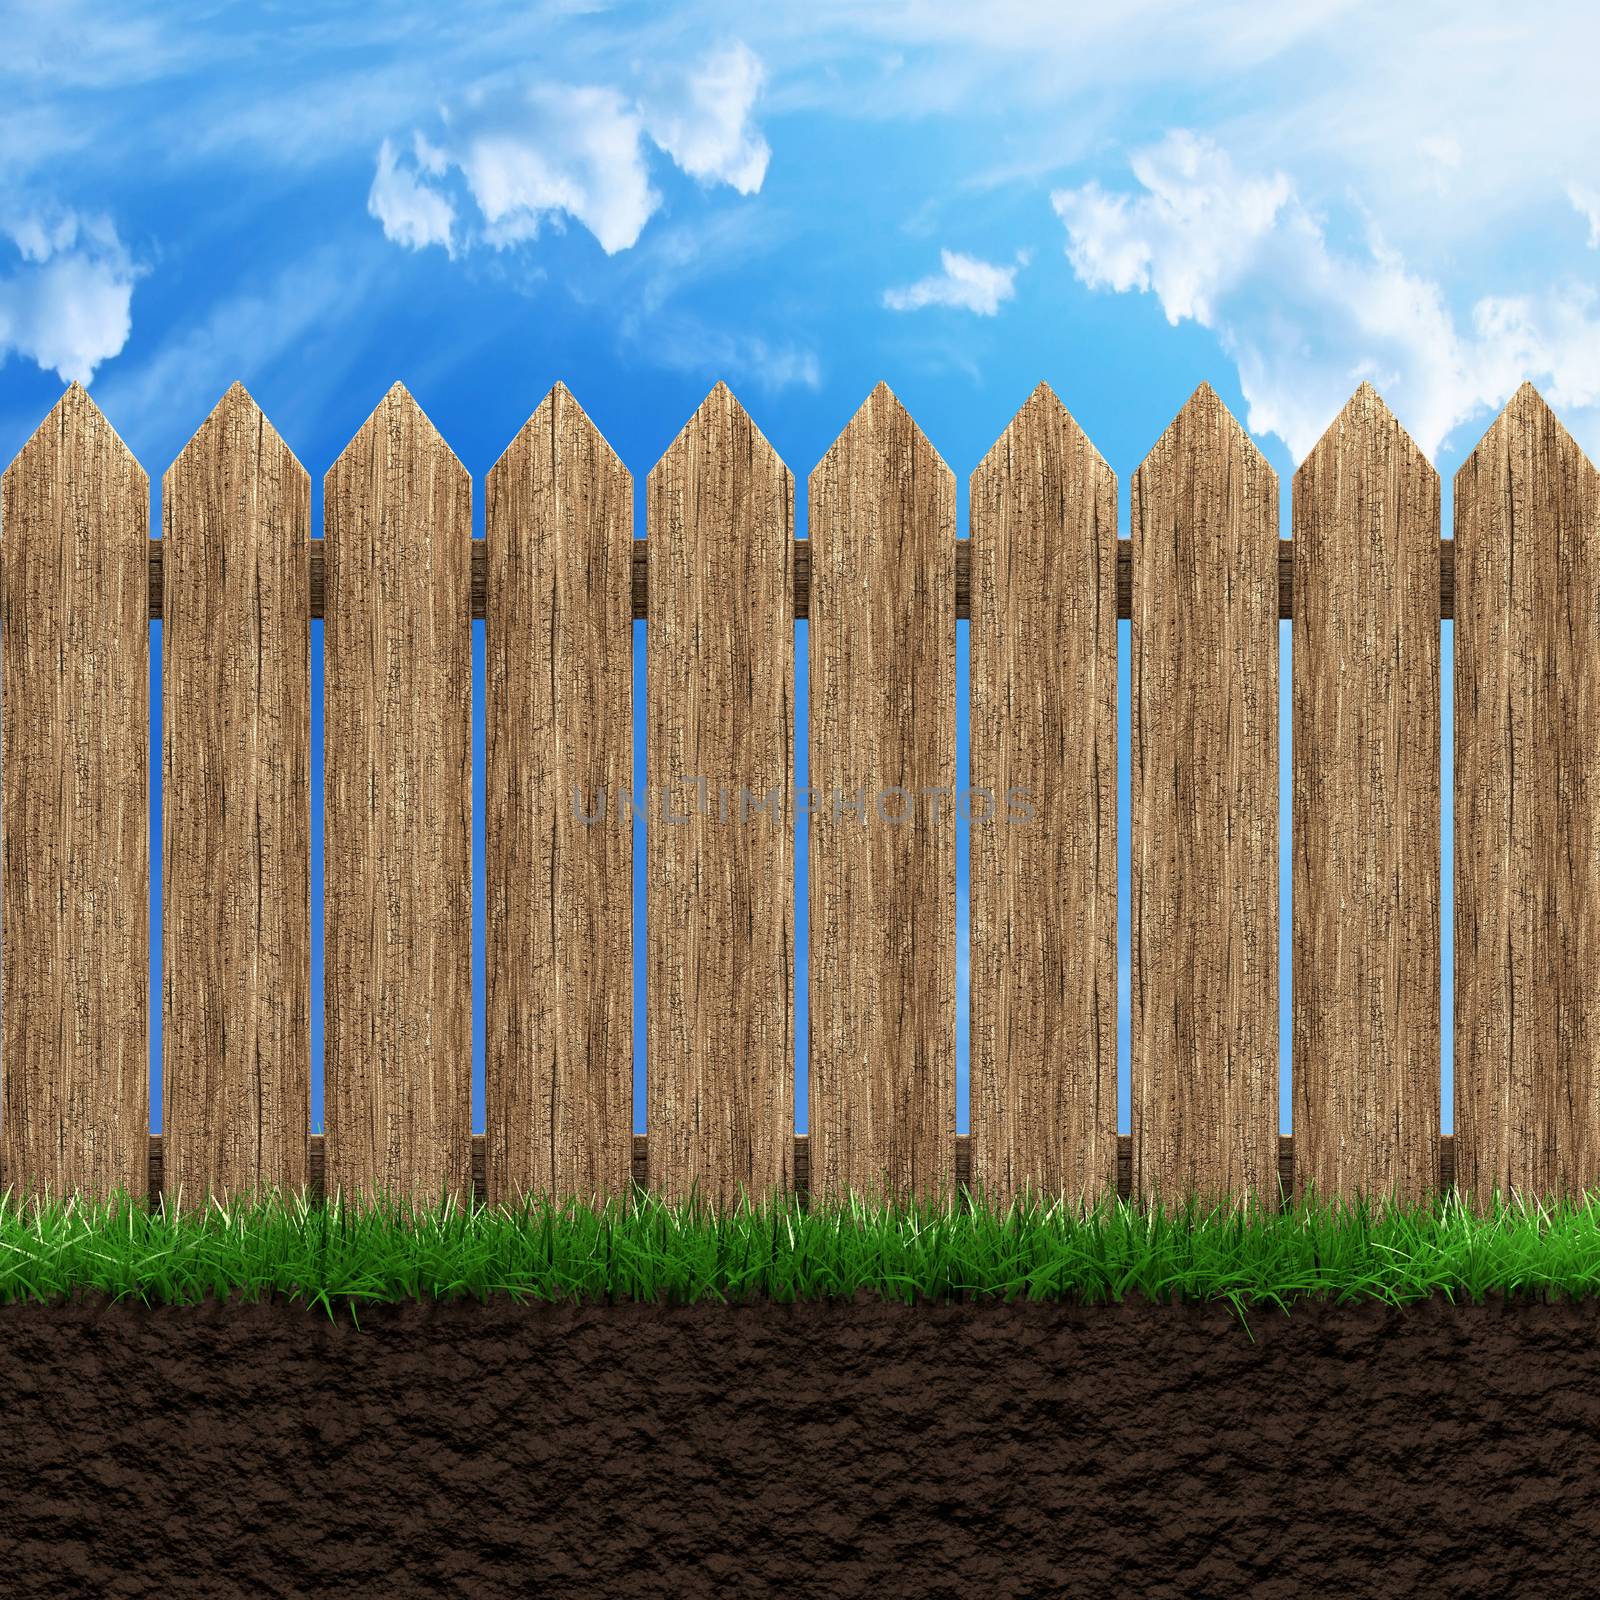 Wooden fence background by dynamicfoto